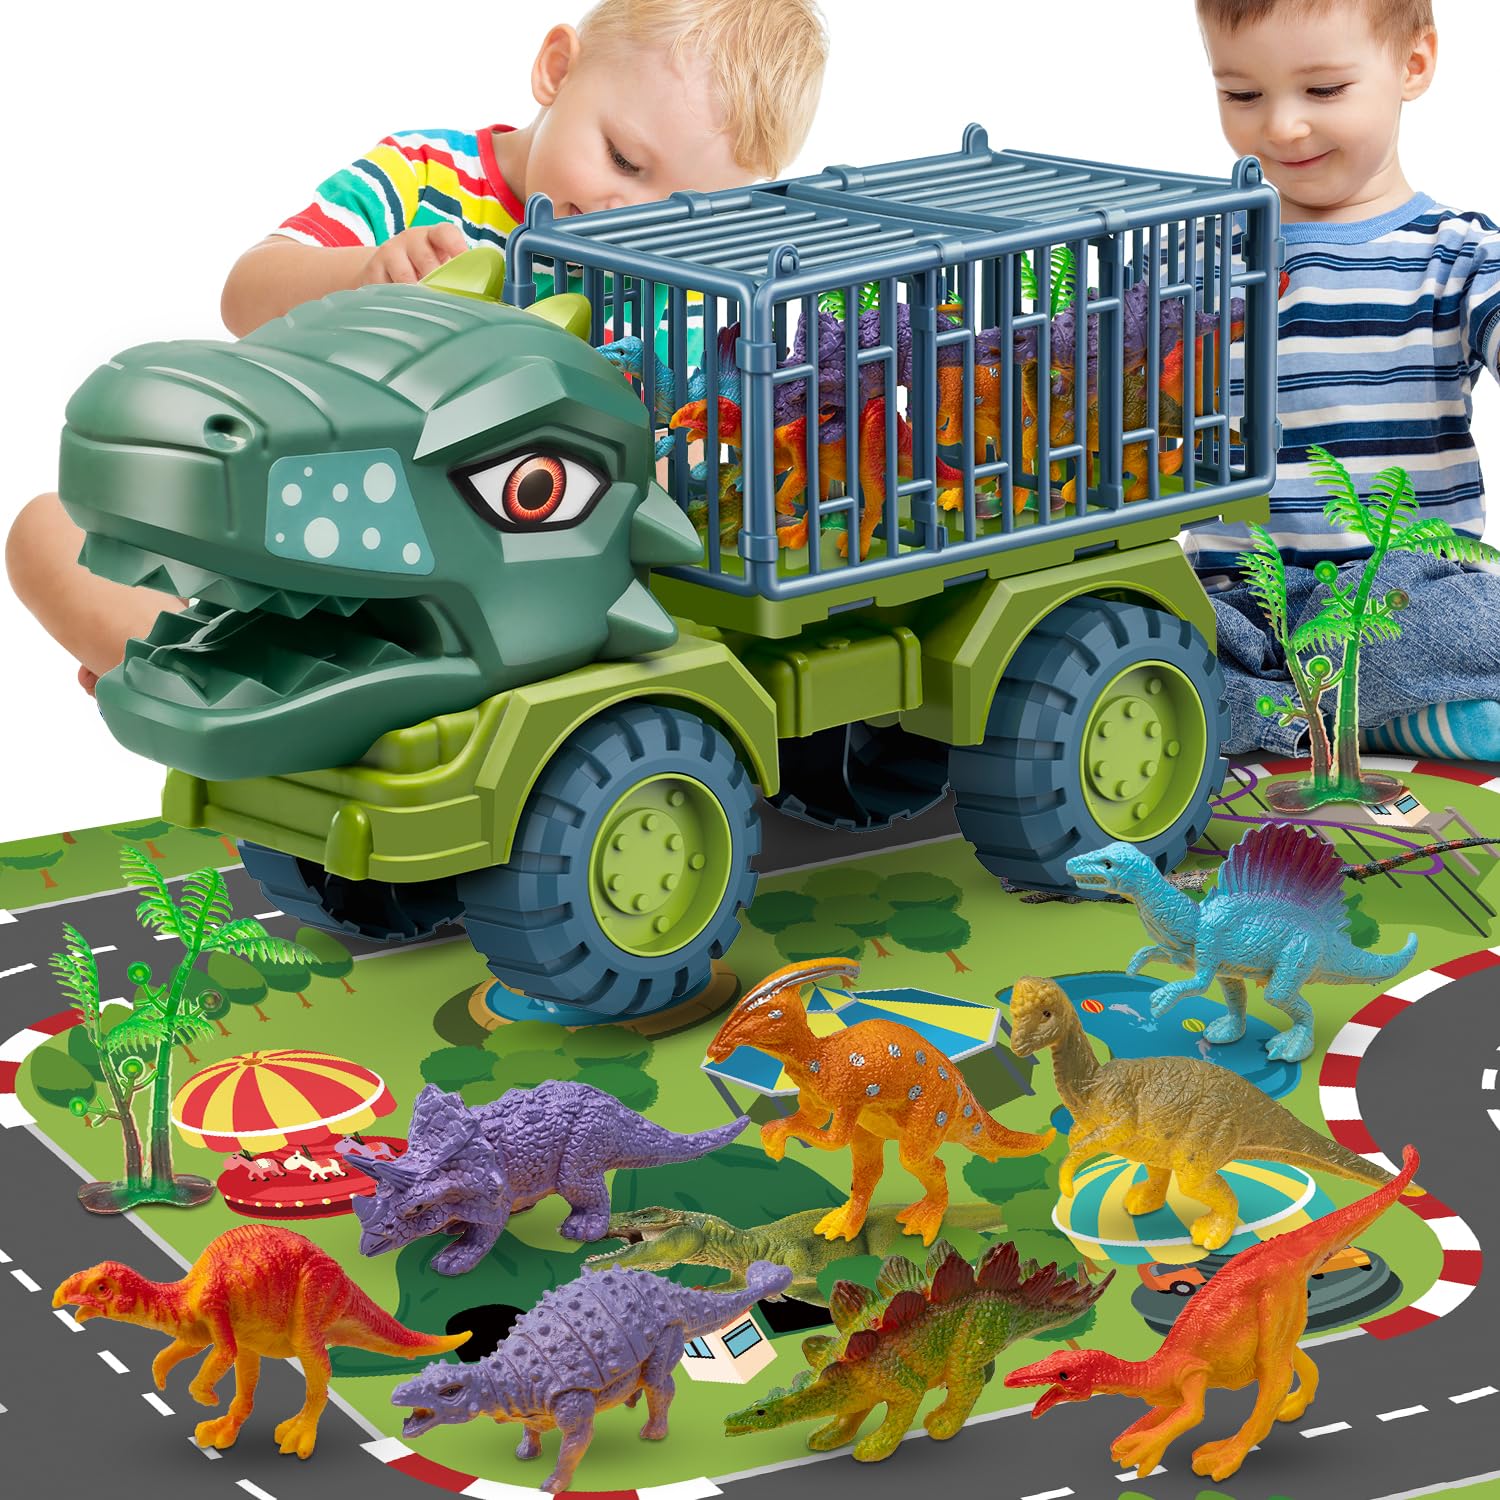 Niwoed Dinosaur Truck Toys for Kids 3-5, Tyrannosaurus Transport Vehicle Carrier Car Toys with 8 Dino Figures, Dinosaur Playset Toys for 3 4 5 6 7 8 9 10 Years Old Boys Girls Kids Birthday Gifts